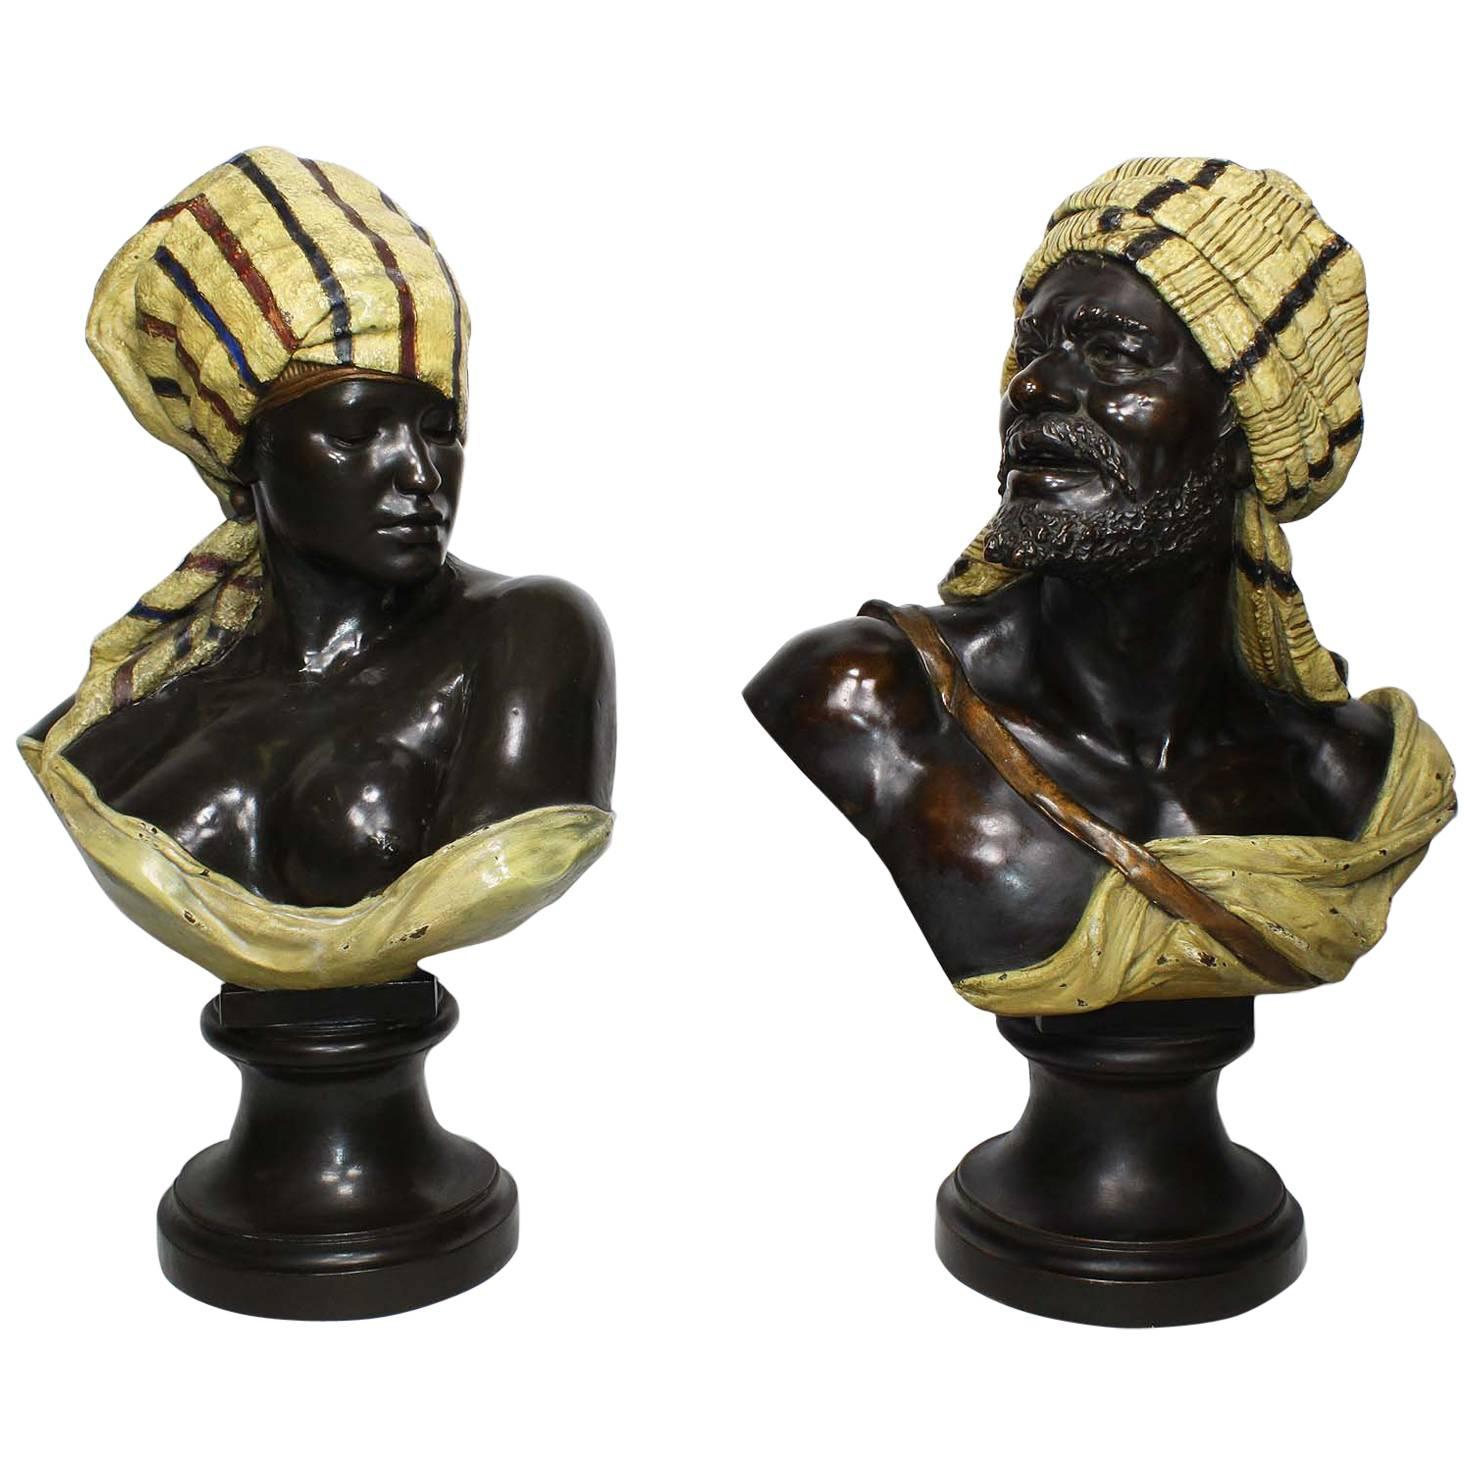 Orientalist Pair of Austrian 19th Century Polychromed Busts of a Bedouin Couple